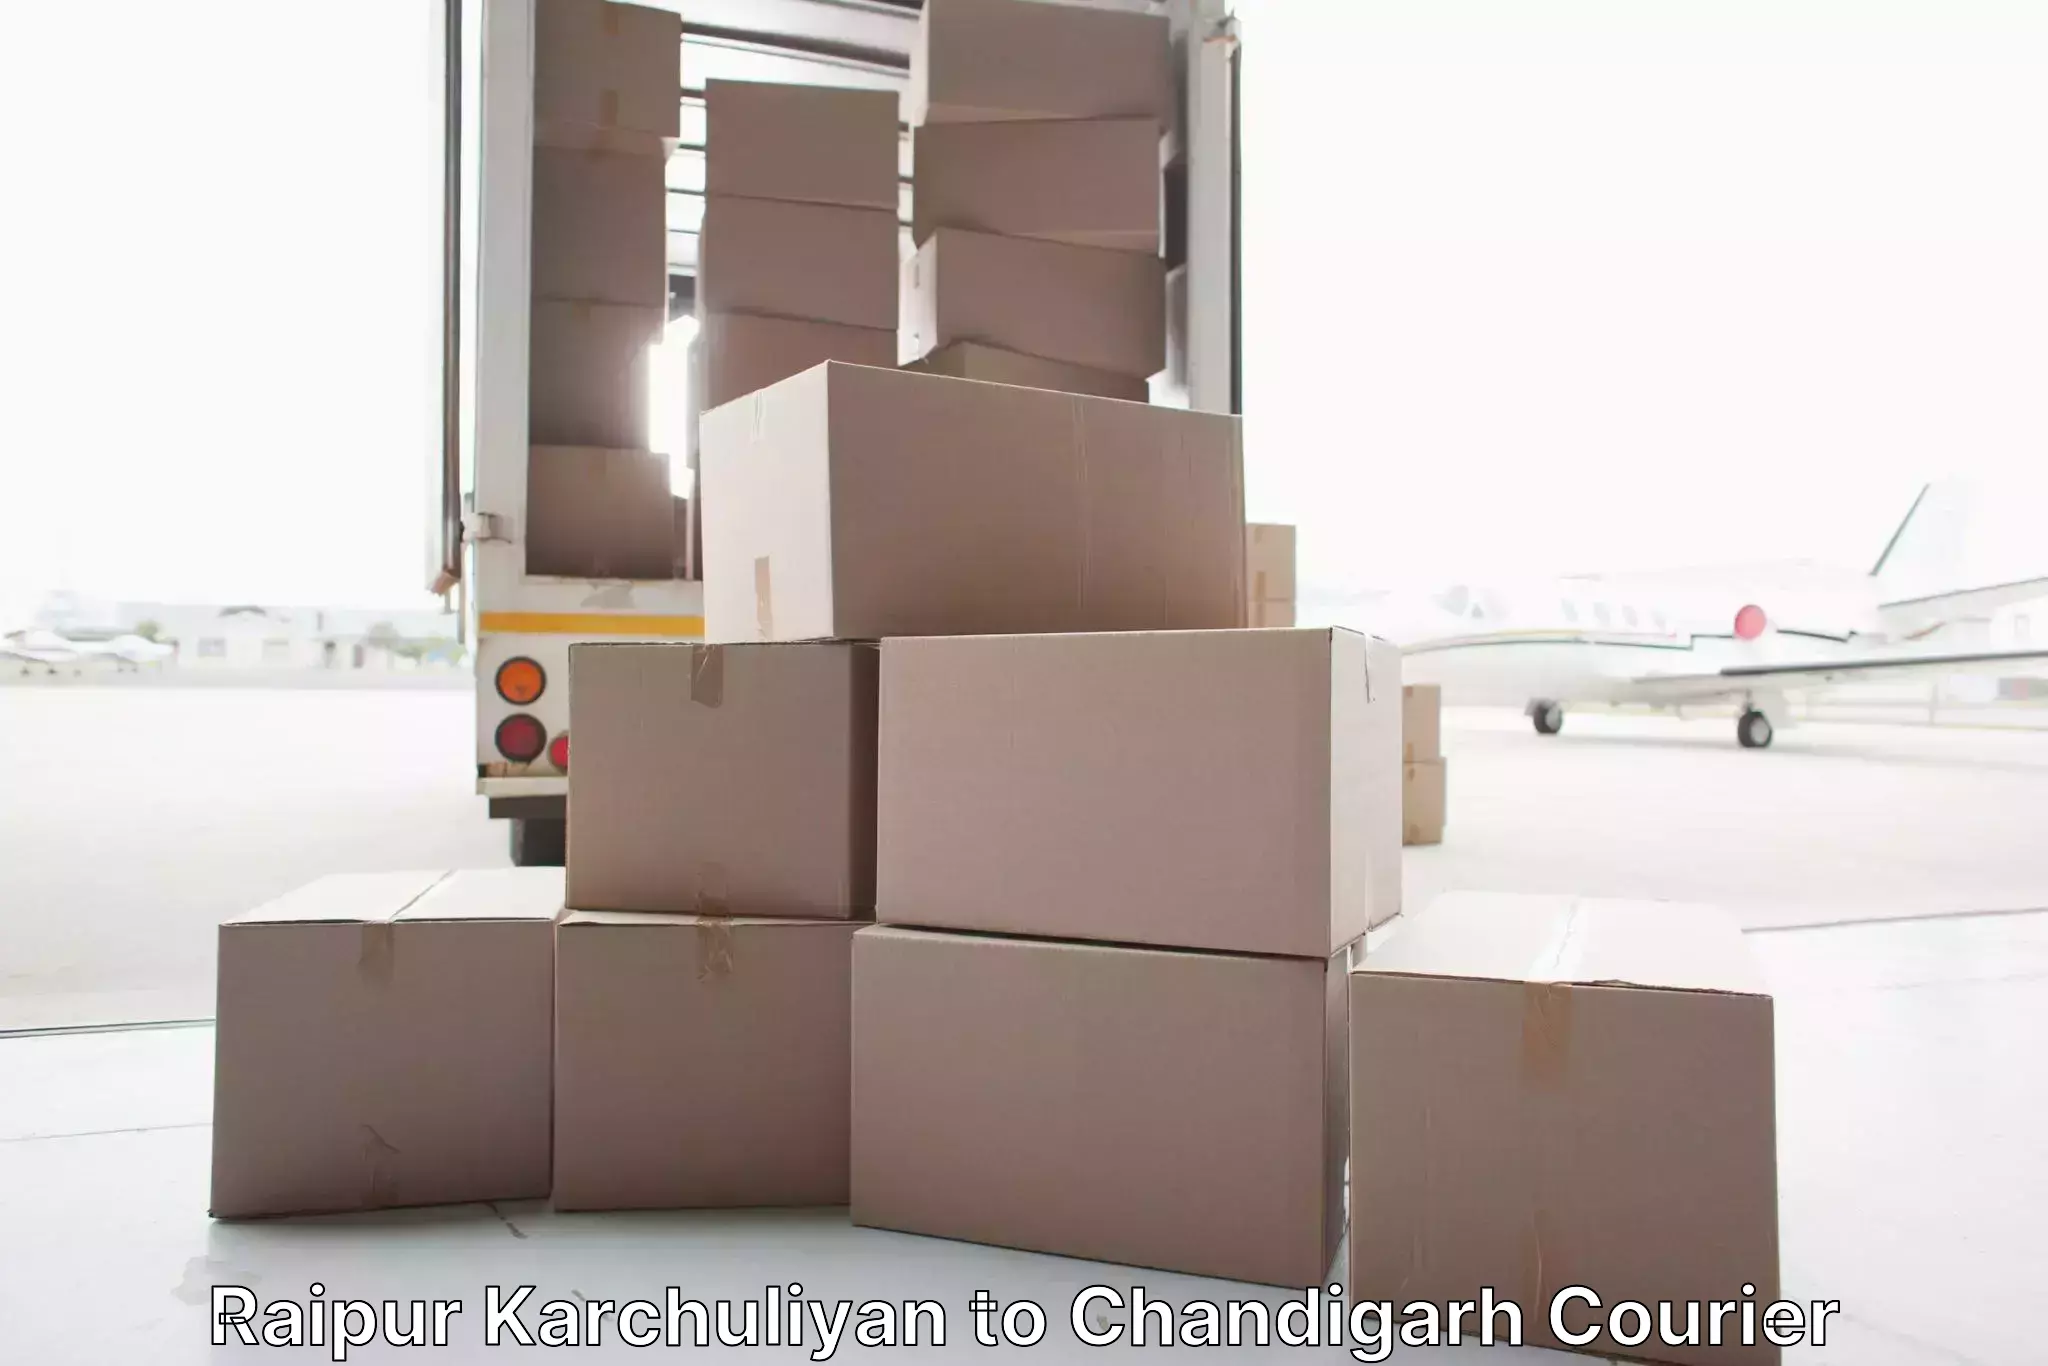 Professional packing and transport Raipur Karchuliyan to Chandigarh